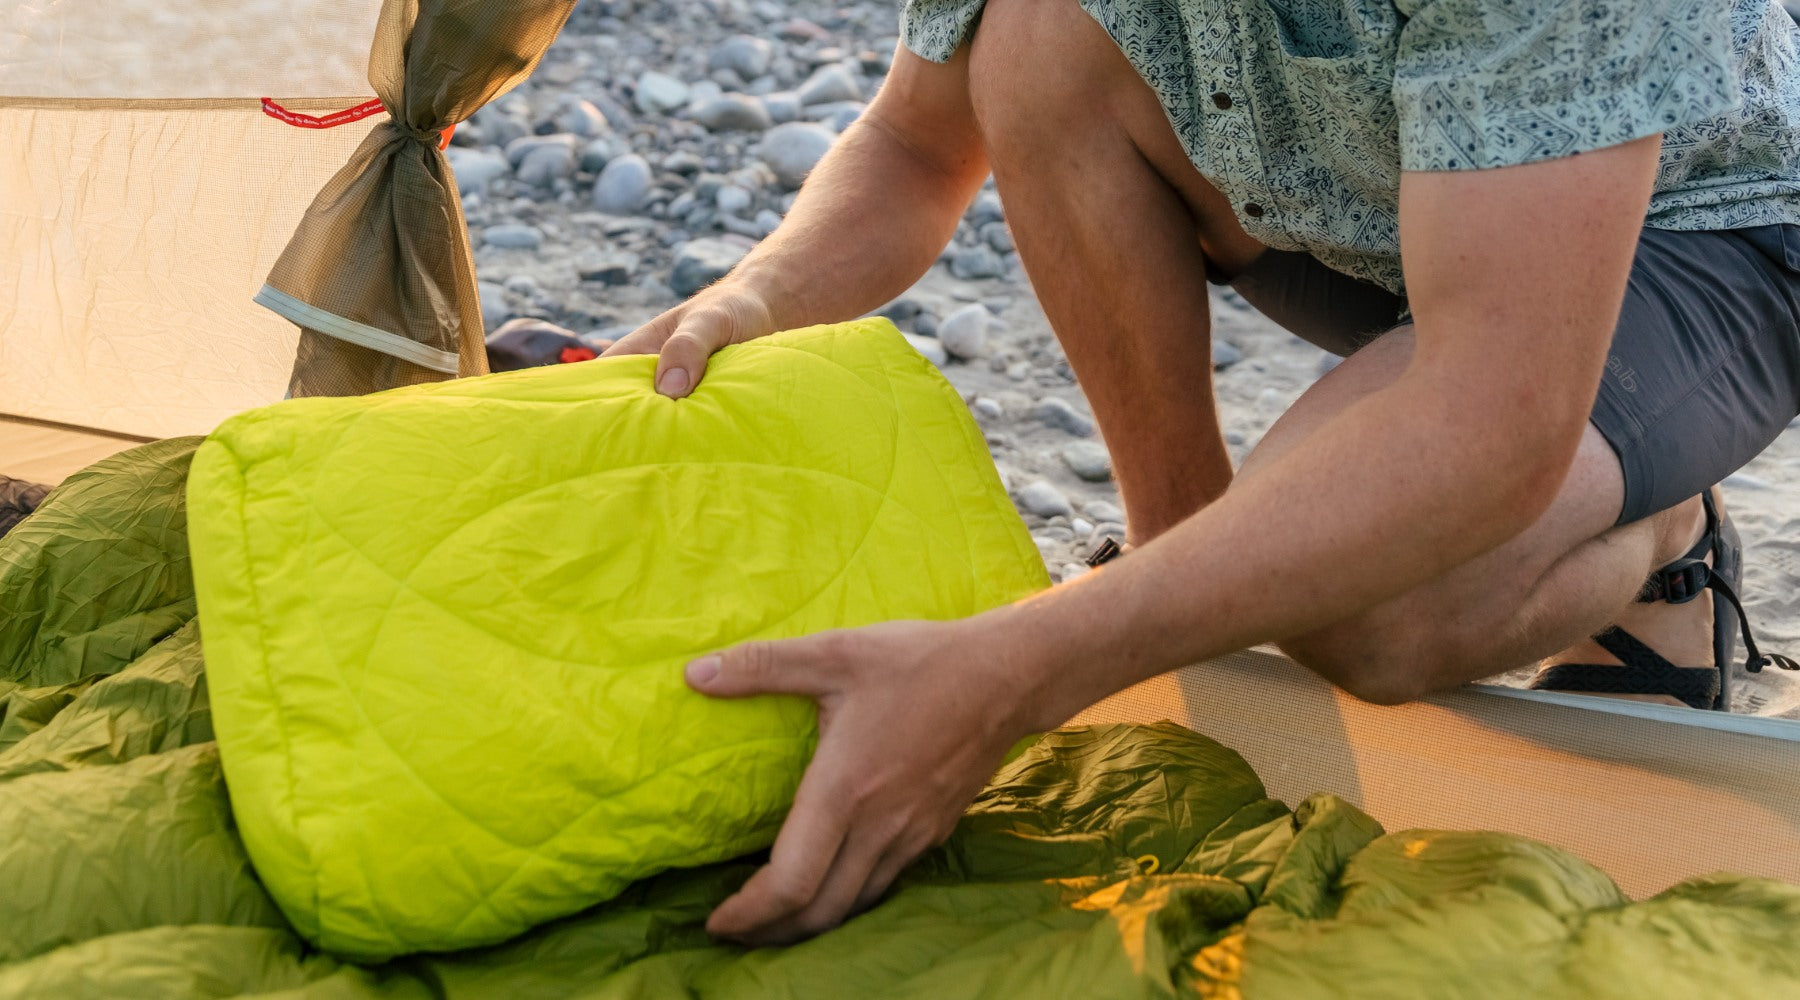 The Zenbivy Pillow offers an ultra-soft 50d Pongee pillowcase with quilted plush padding on the top that is downright luxurious.